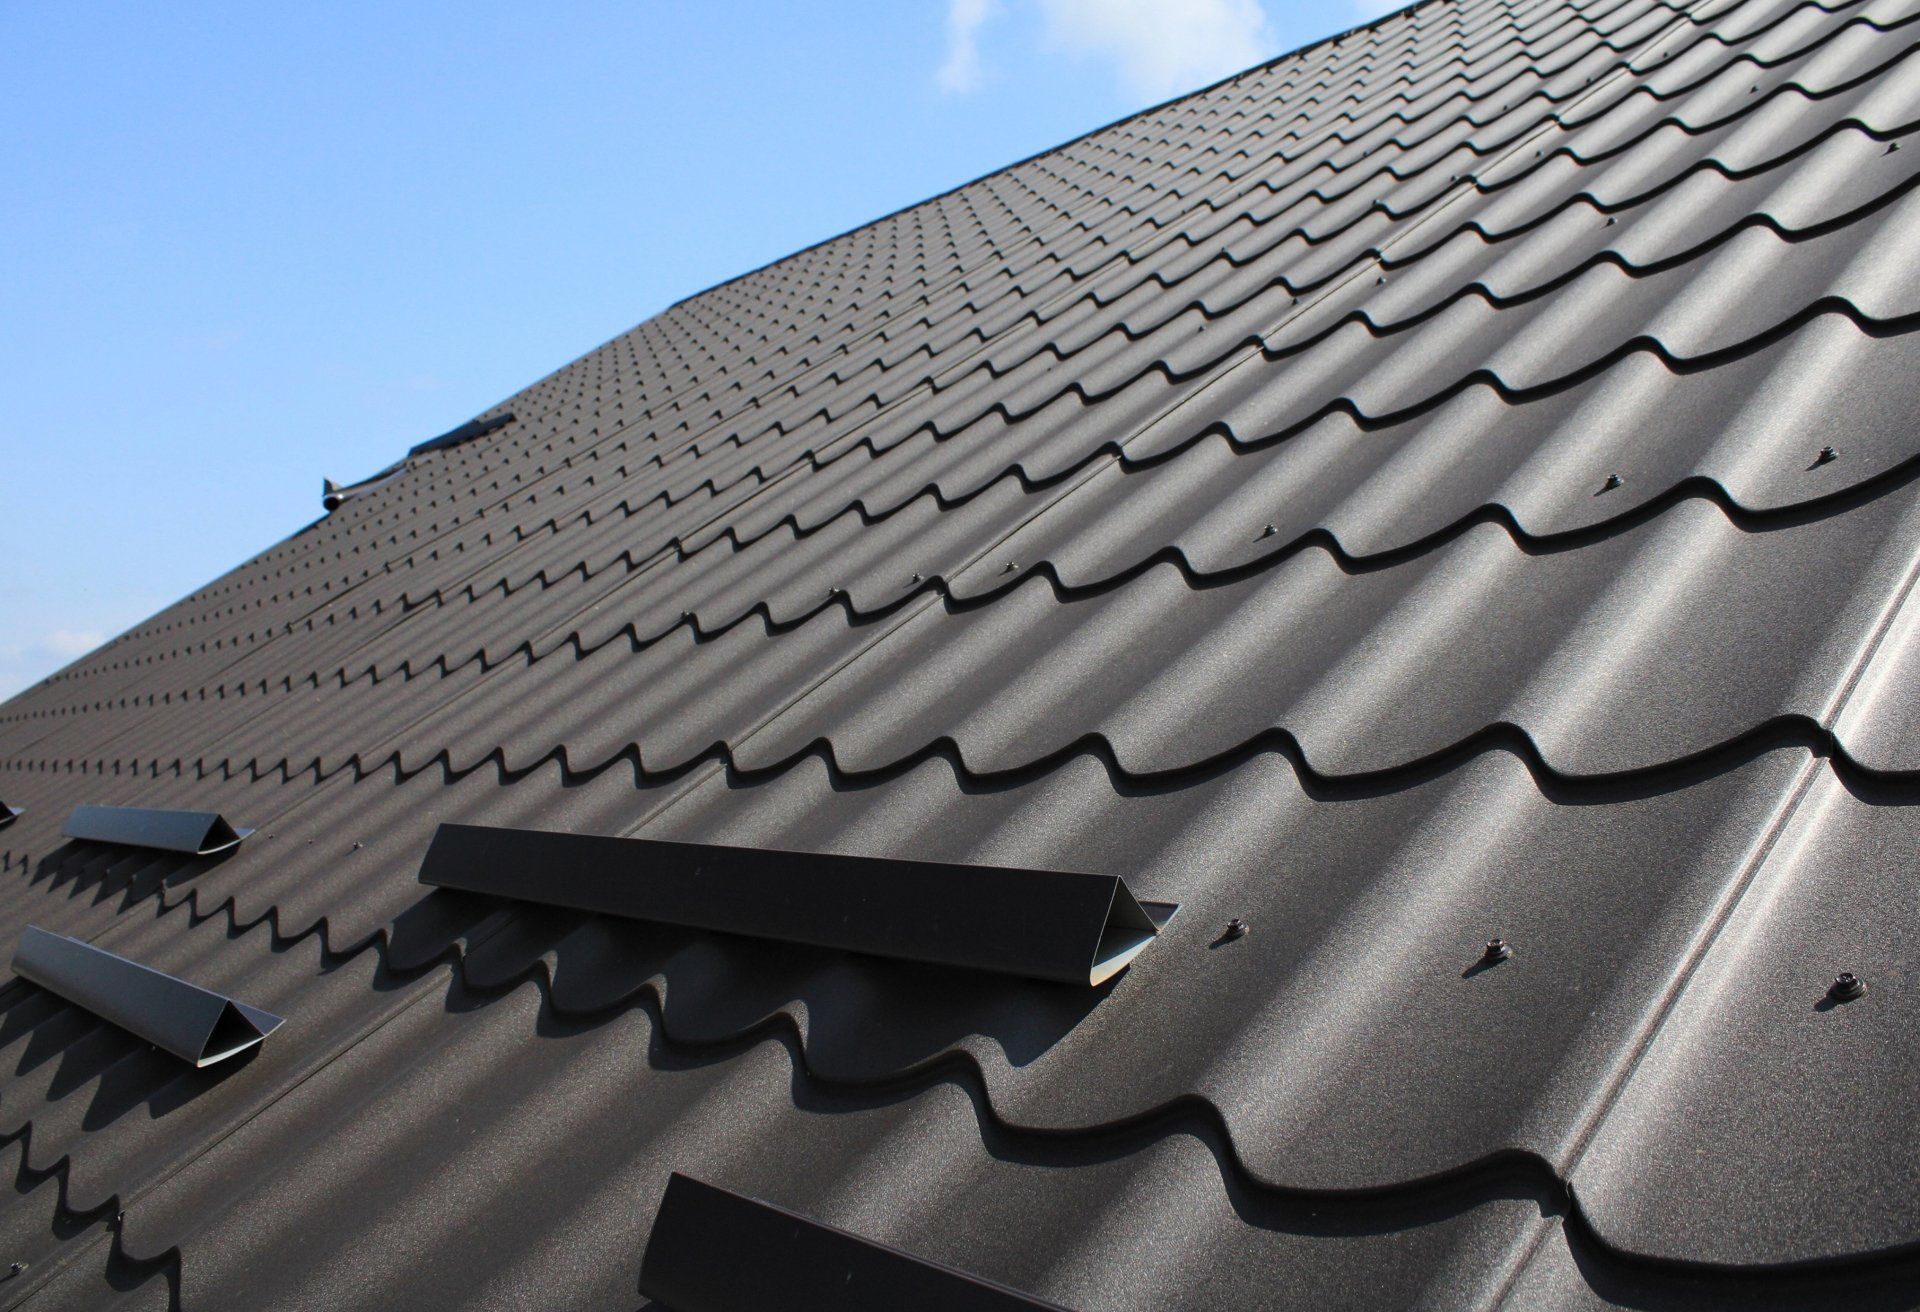 Professionally Tiled Roof - Roofing Installations In Mid North Coast